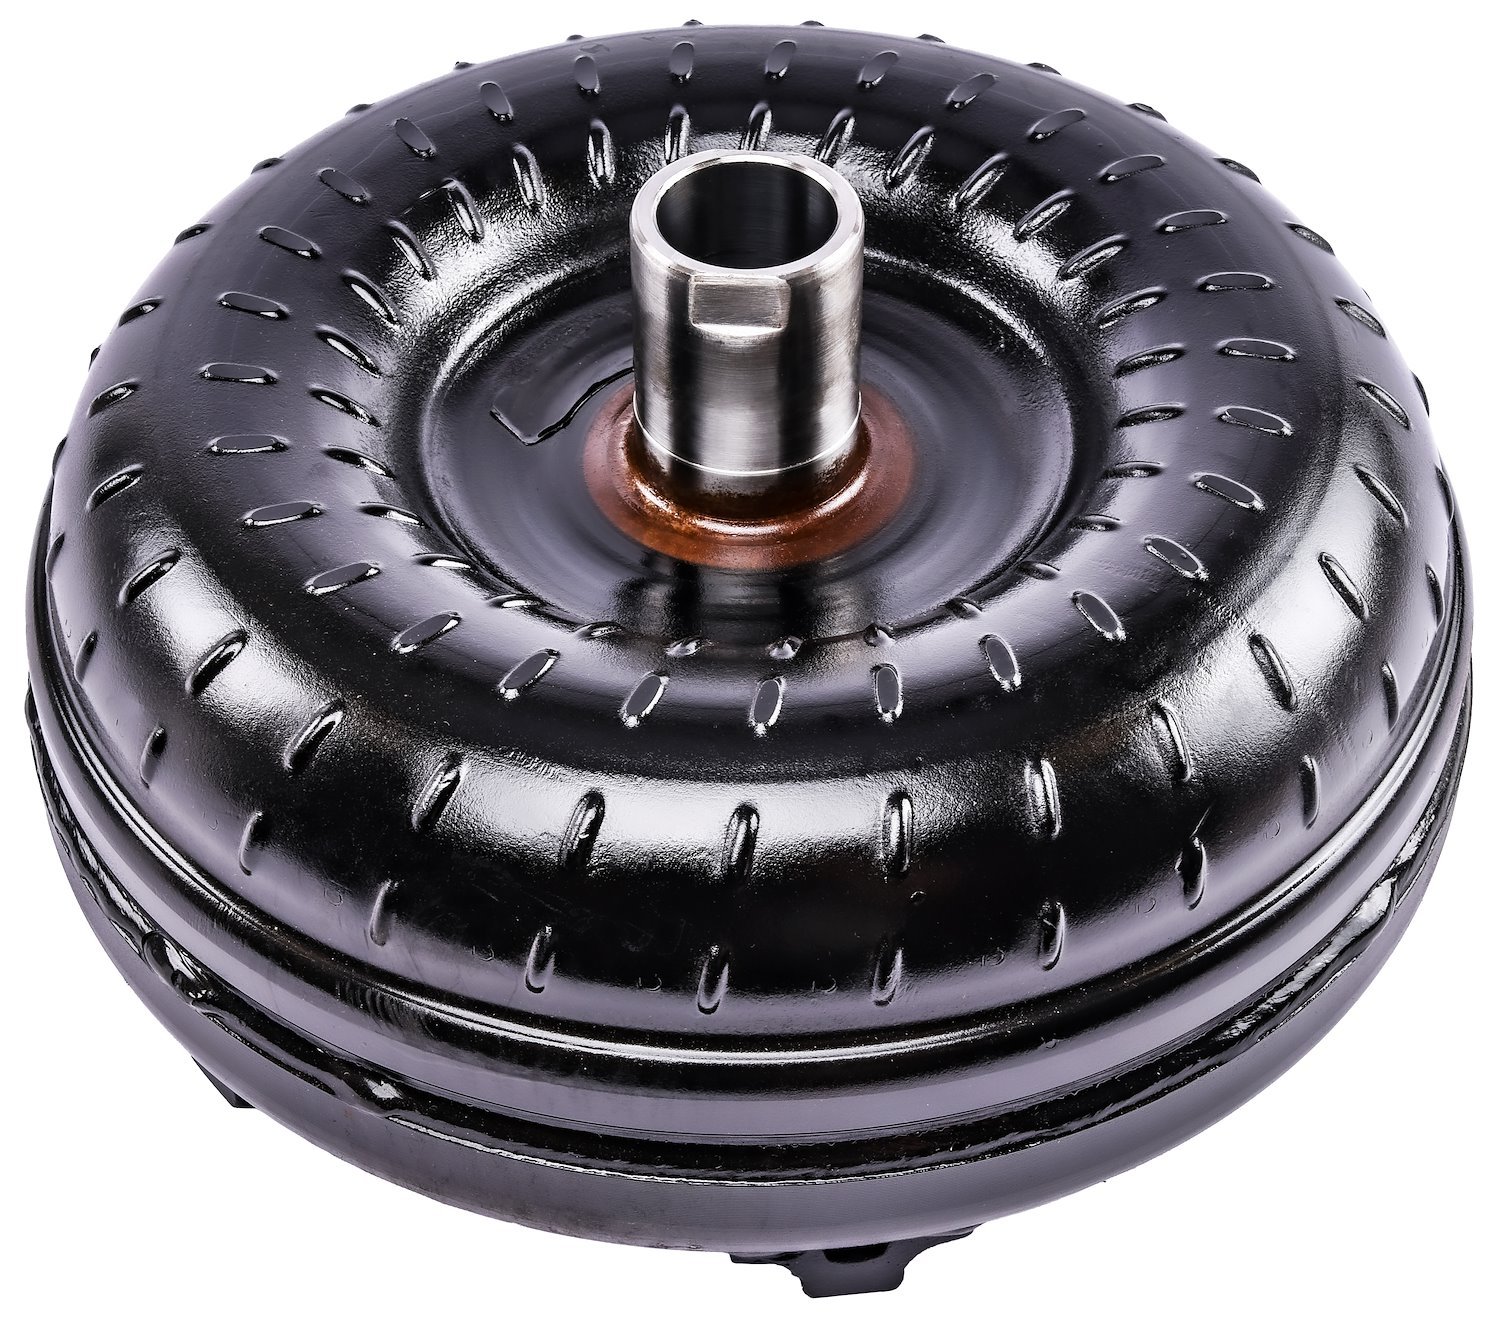 JEGS 60469: Torque Converter for GM 4L80E [2400-2700 RPM] JEGS